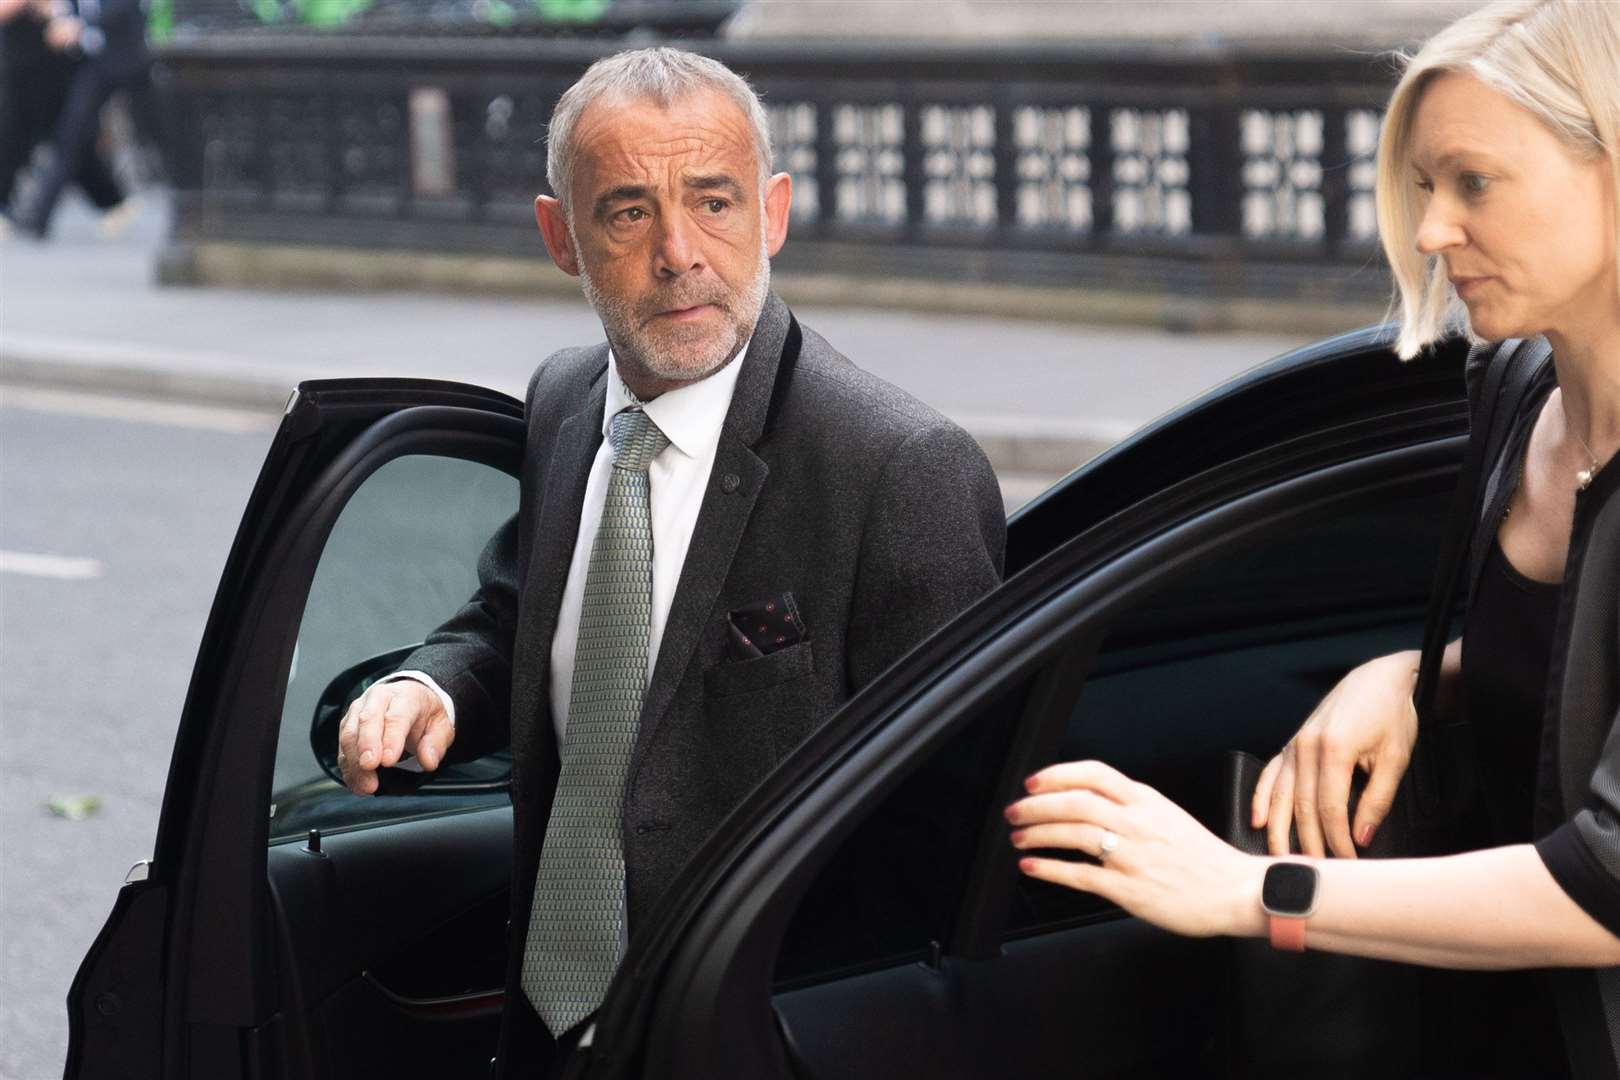 Michael Turner, known professionally as Michael Le Vell, arrives at the Rolls Buildings (James Manning/PA)